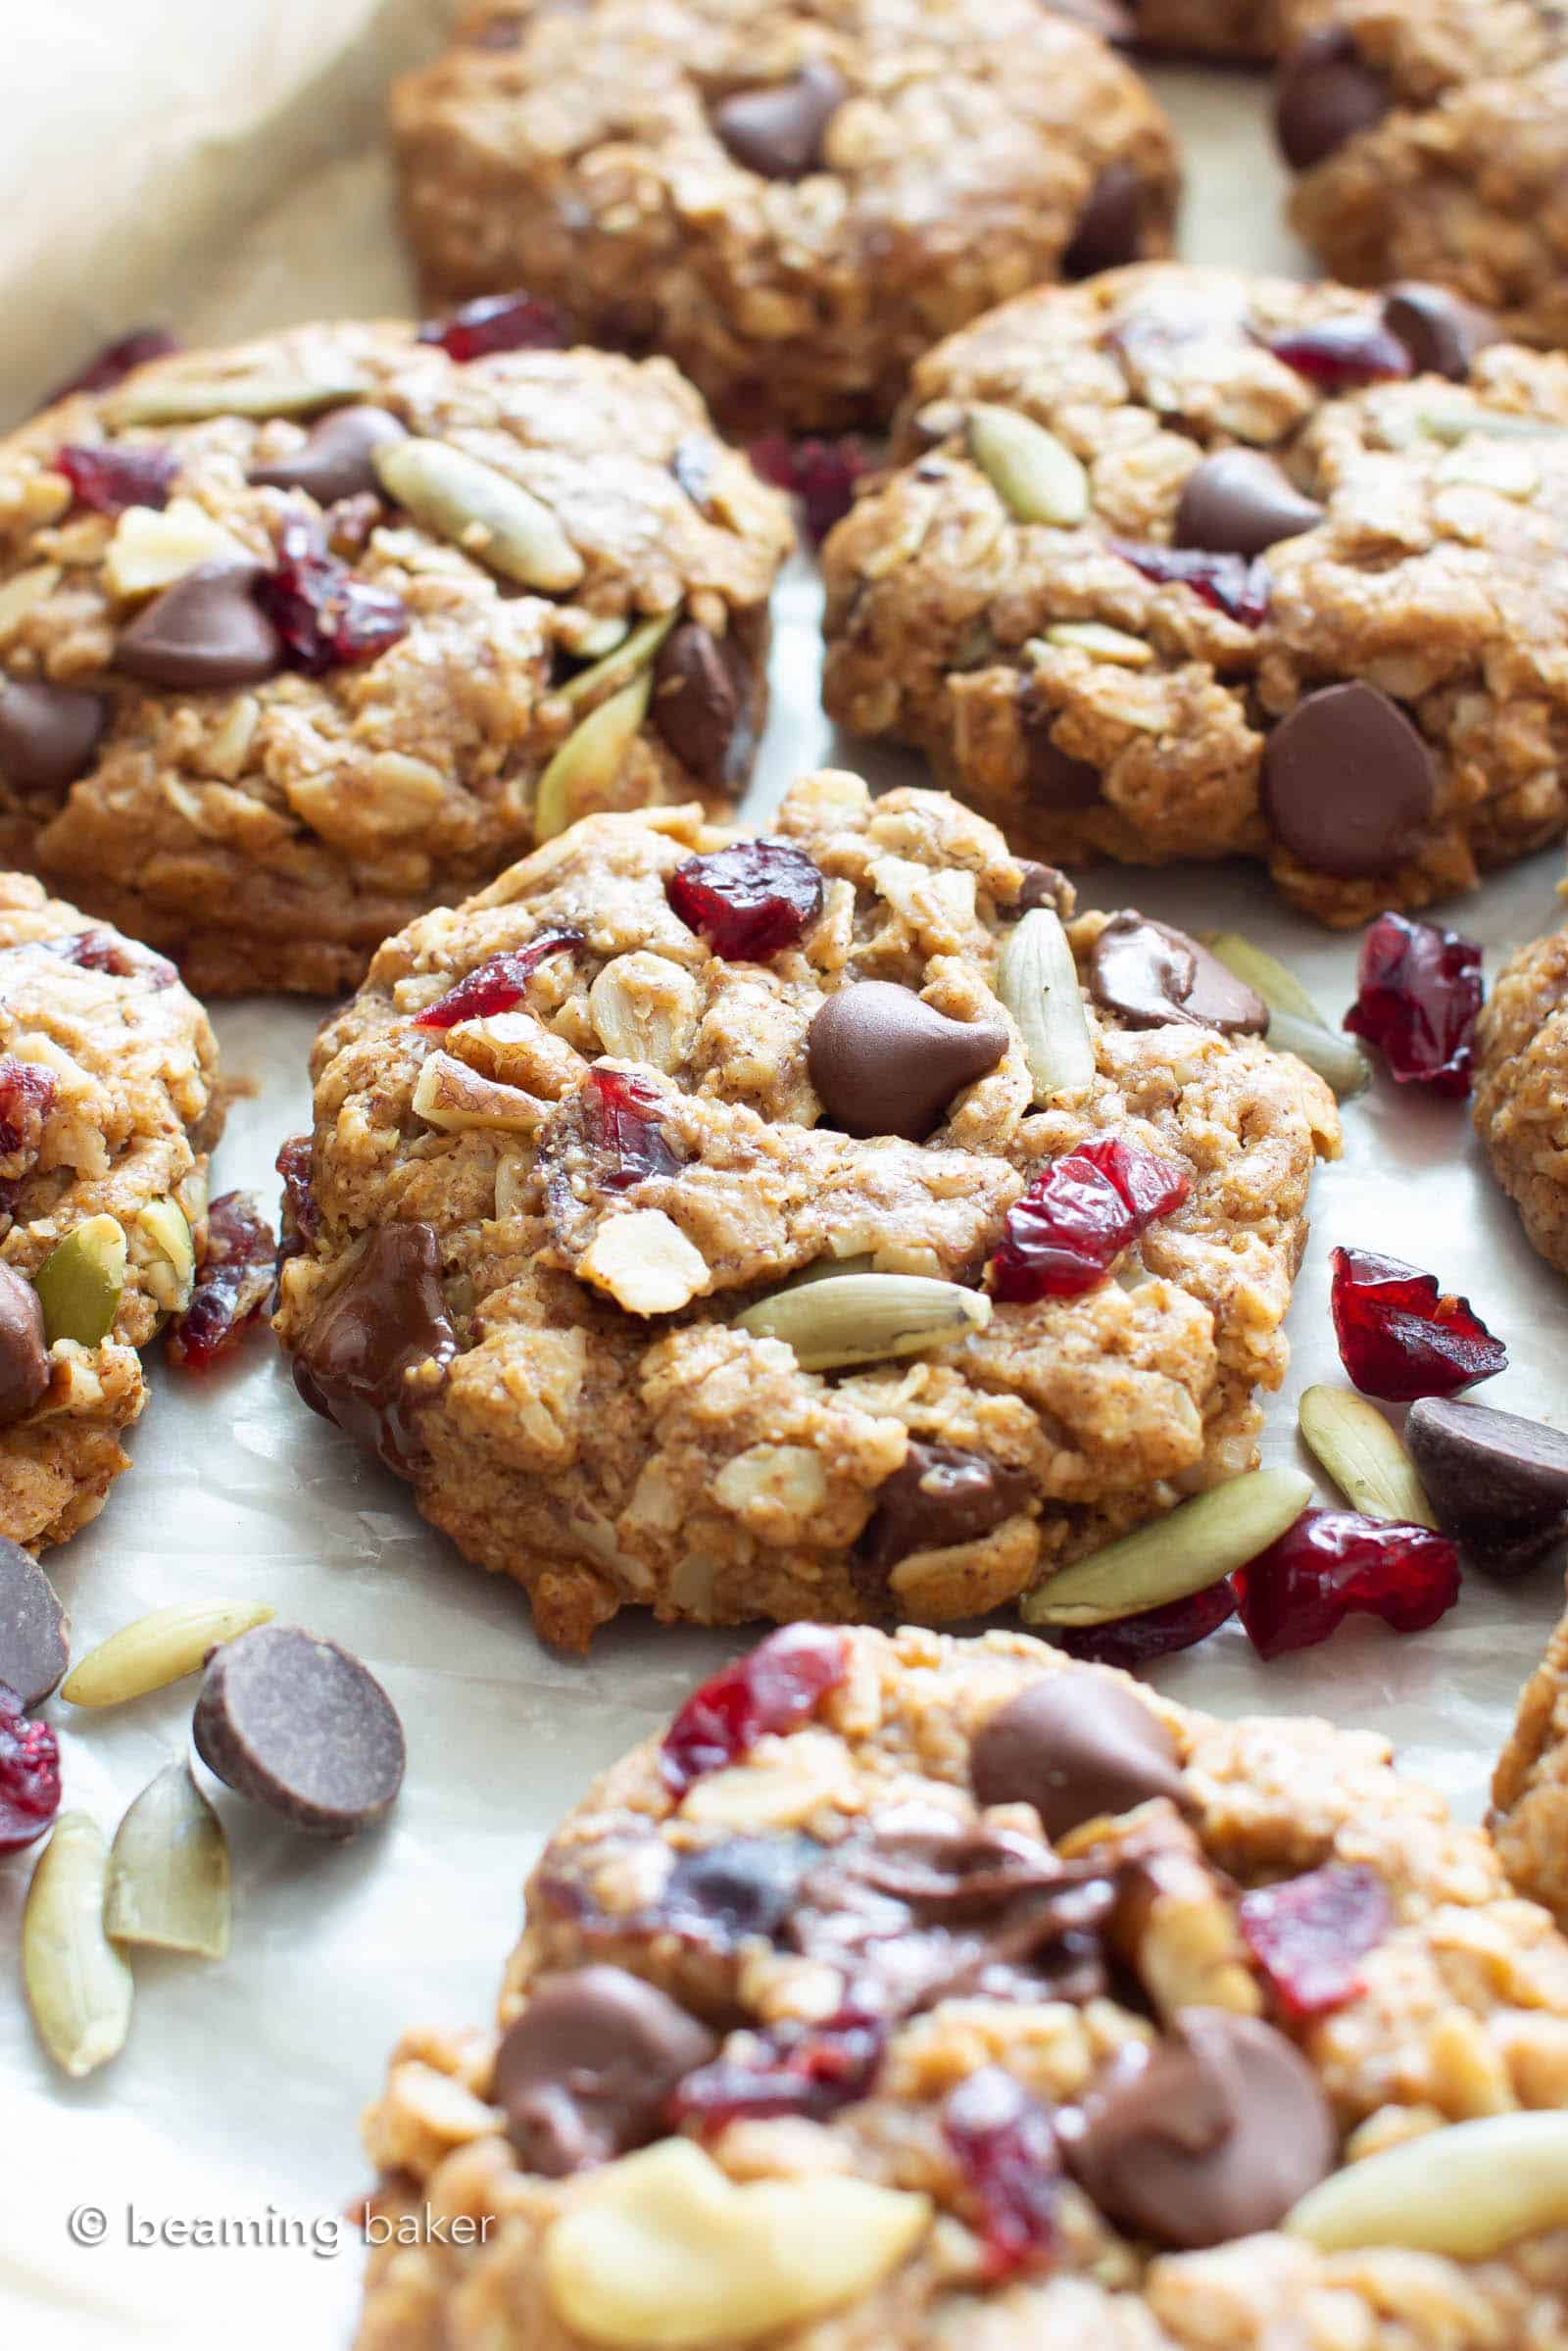 Chewy Vegan Trail Mix Cookies: an easy recipe for vegan trail mix cookies that are delightfully chewy and packed with healthy fruits, nuts and seeds! #Vegan #TrailMix #Cookies | Recipe at BeamingBaker.com